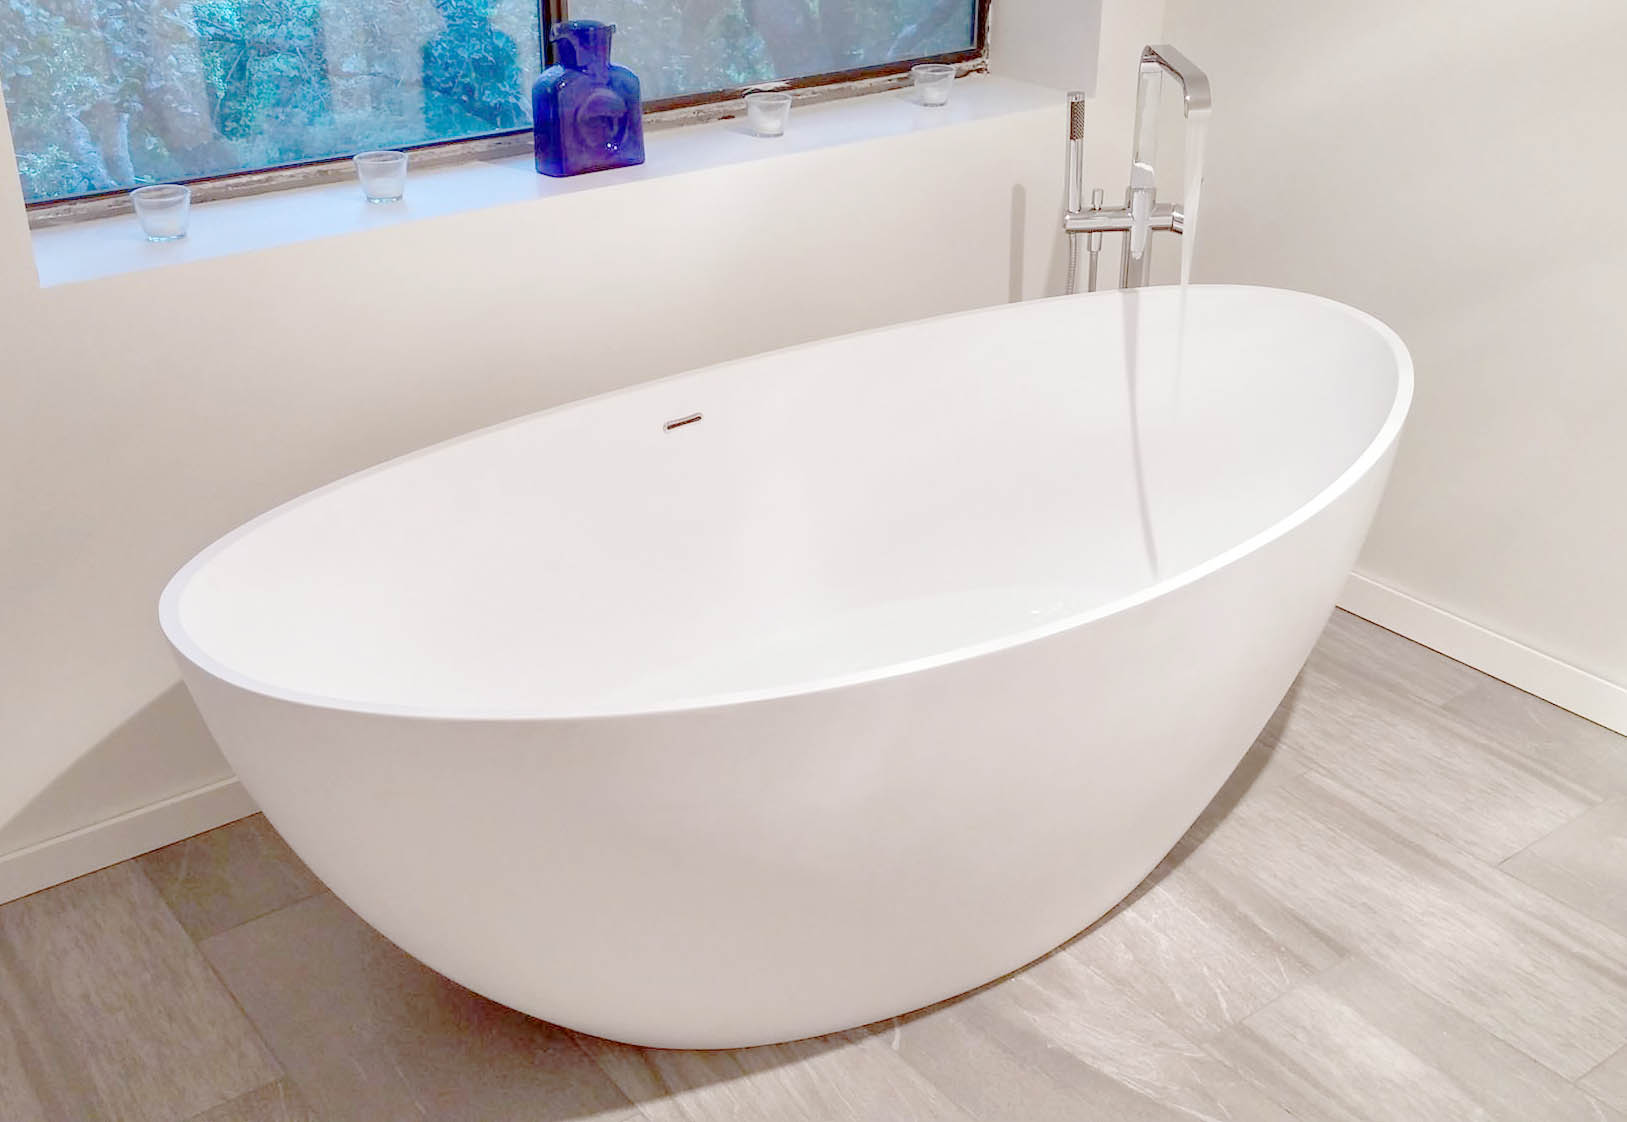 luxury bathtub with freestanding faucet and showerhead